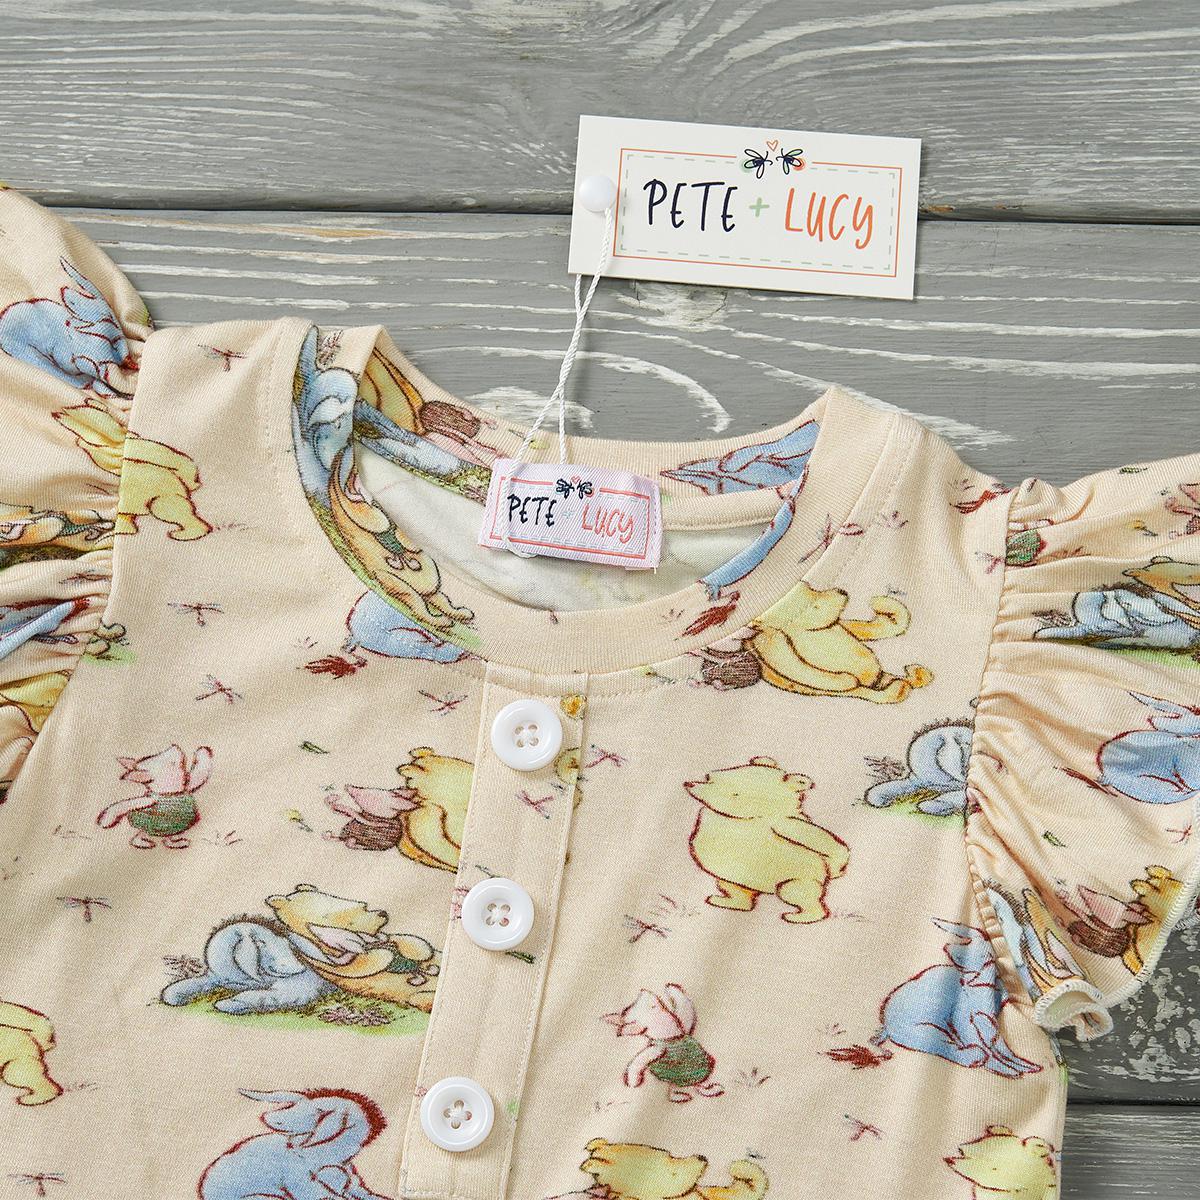 (Preorder) Silly Old Bear Girl’s Infant Romper by Pete + Lucy